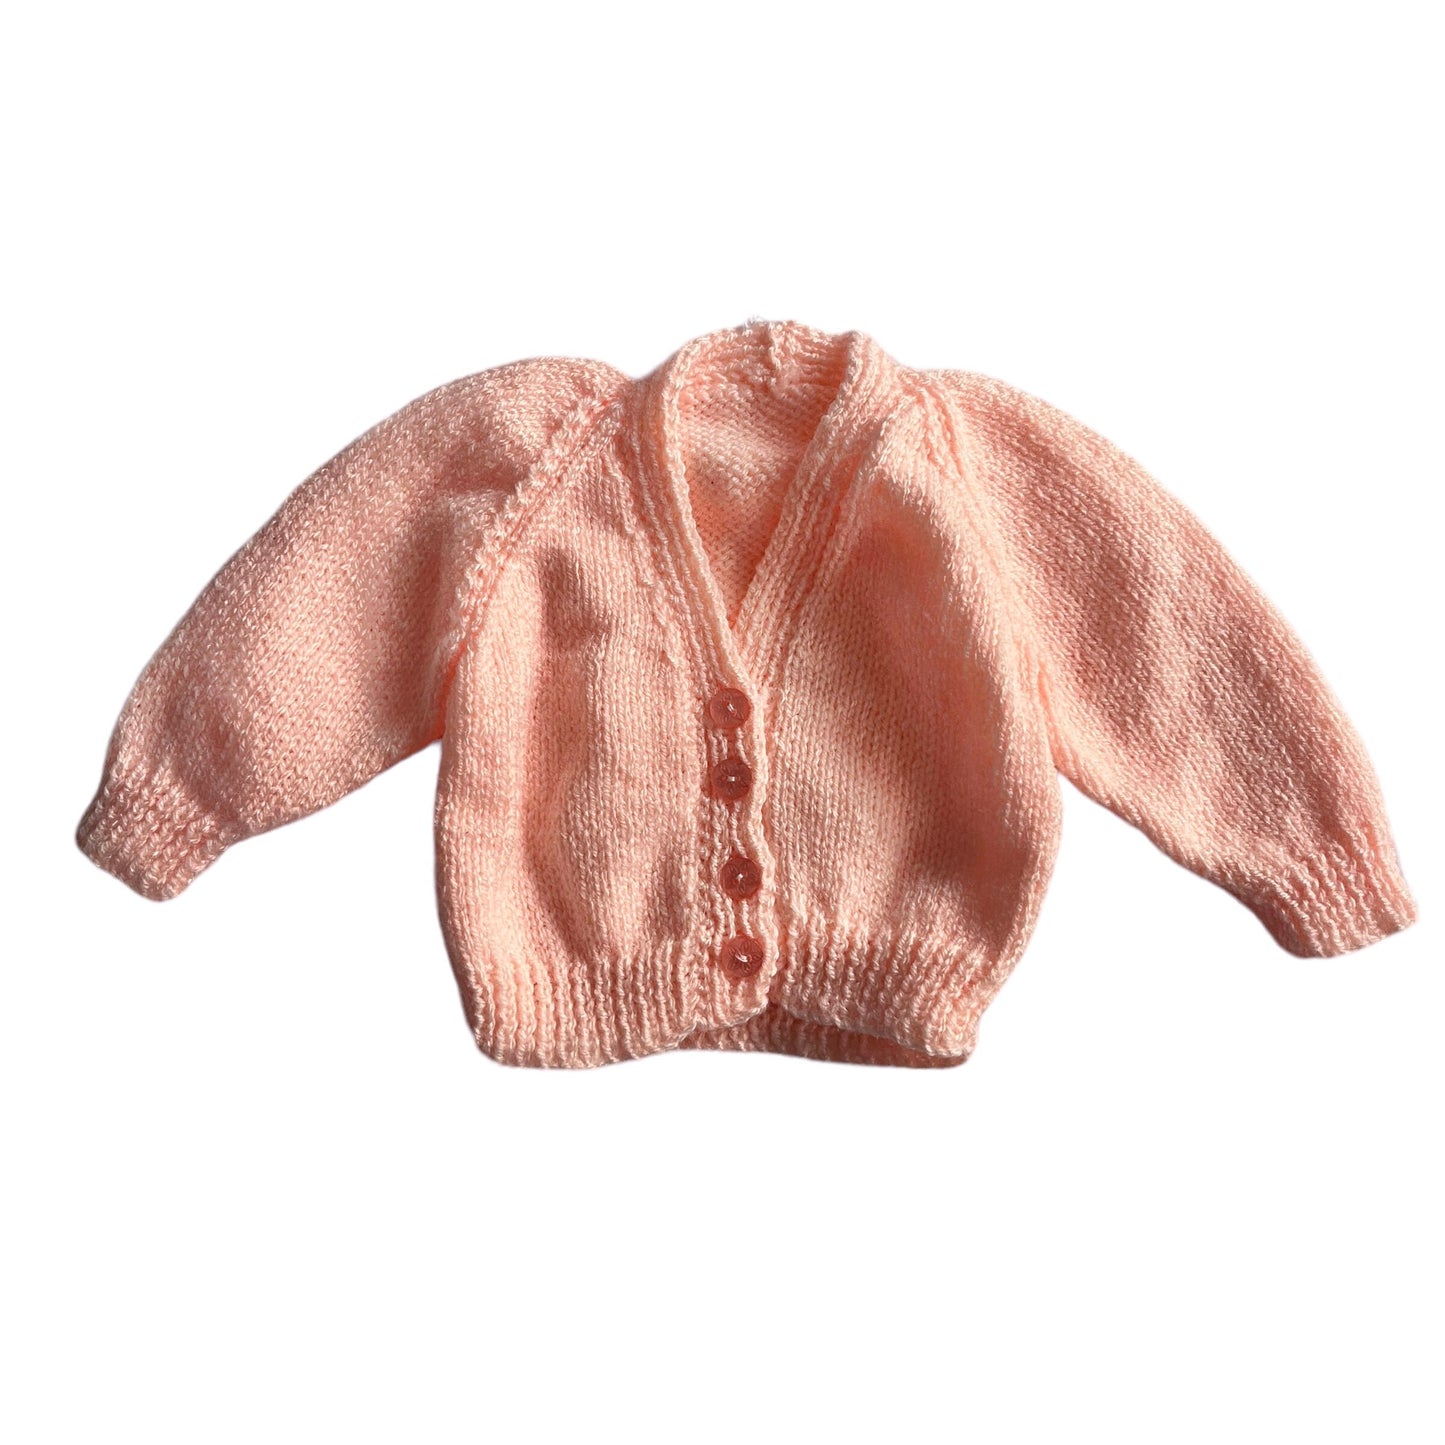 Vintage Knitted Peach Cardigan 0-3 Months